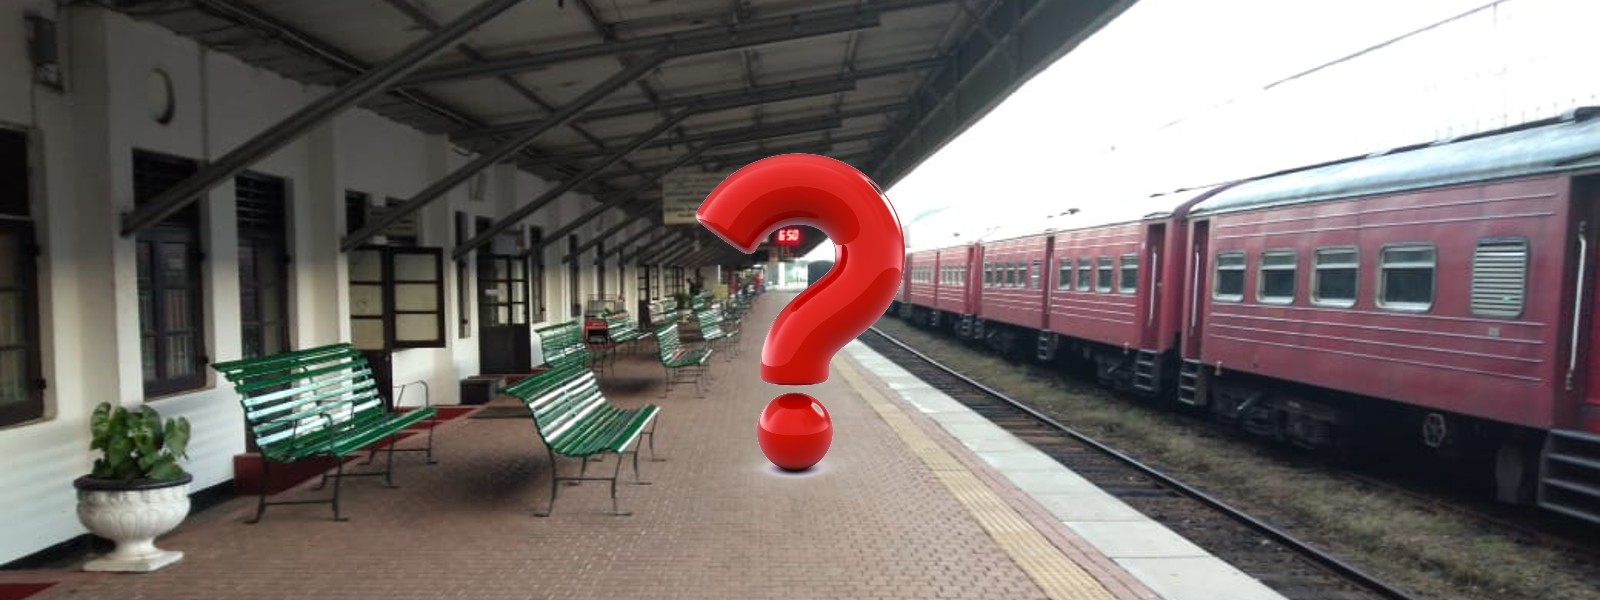 What is the reason for the unexpected token strike? Station Masters’ Union Chairman explains